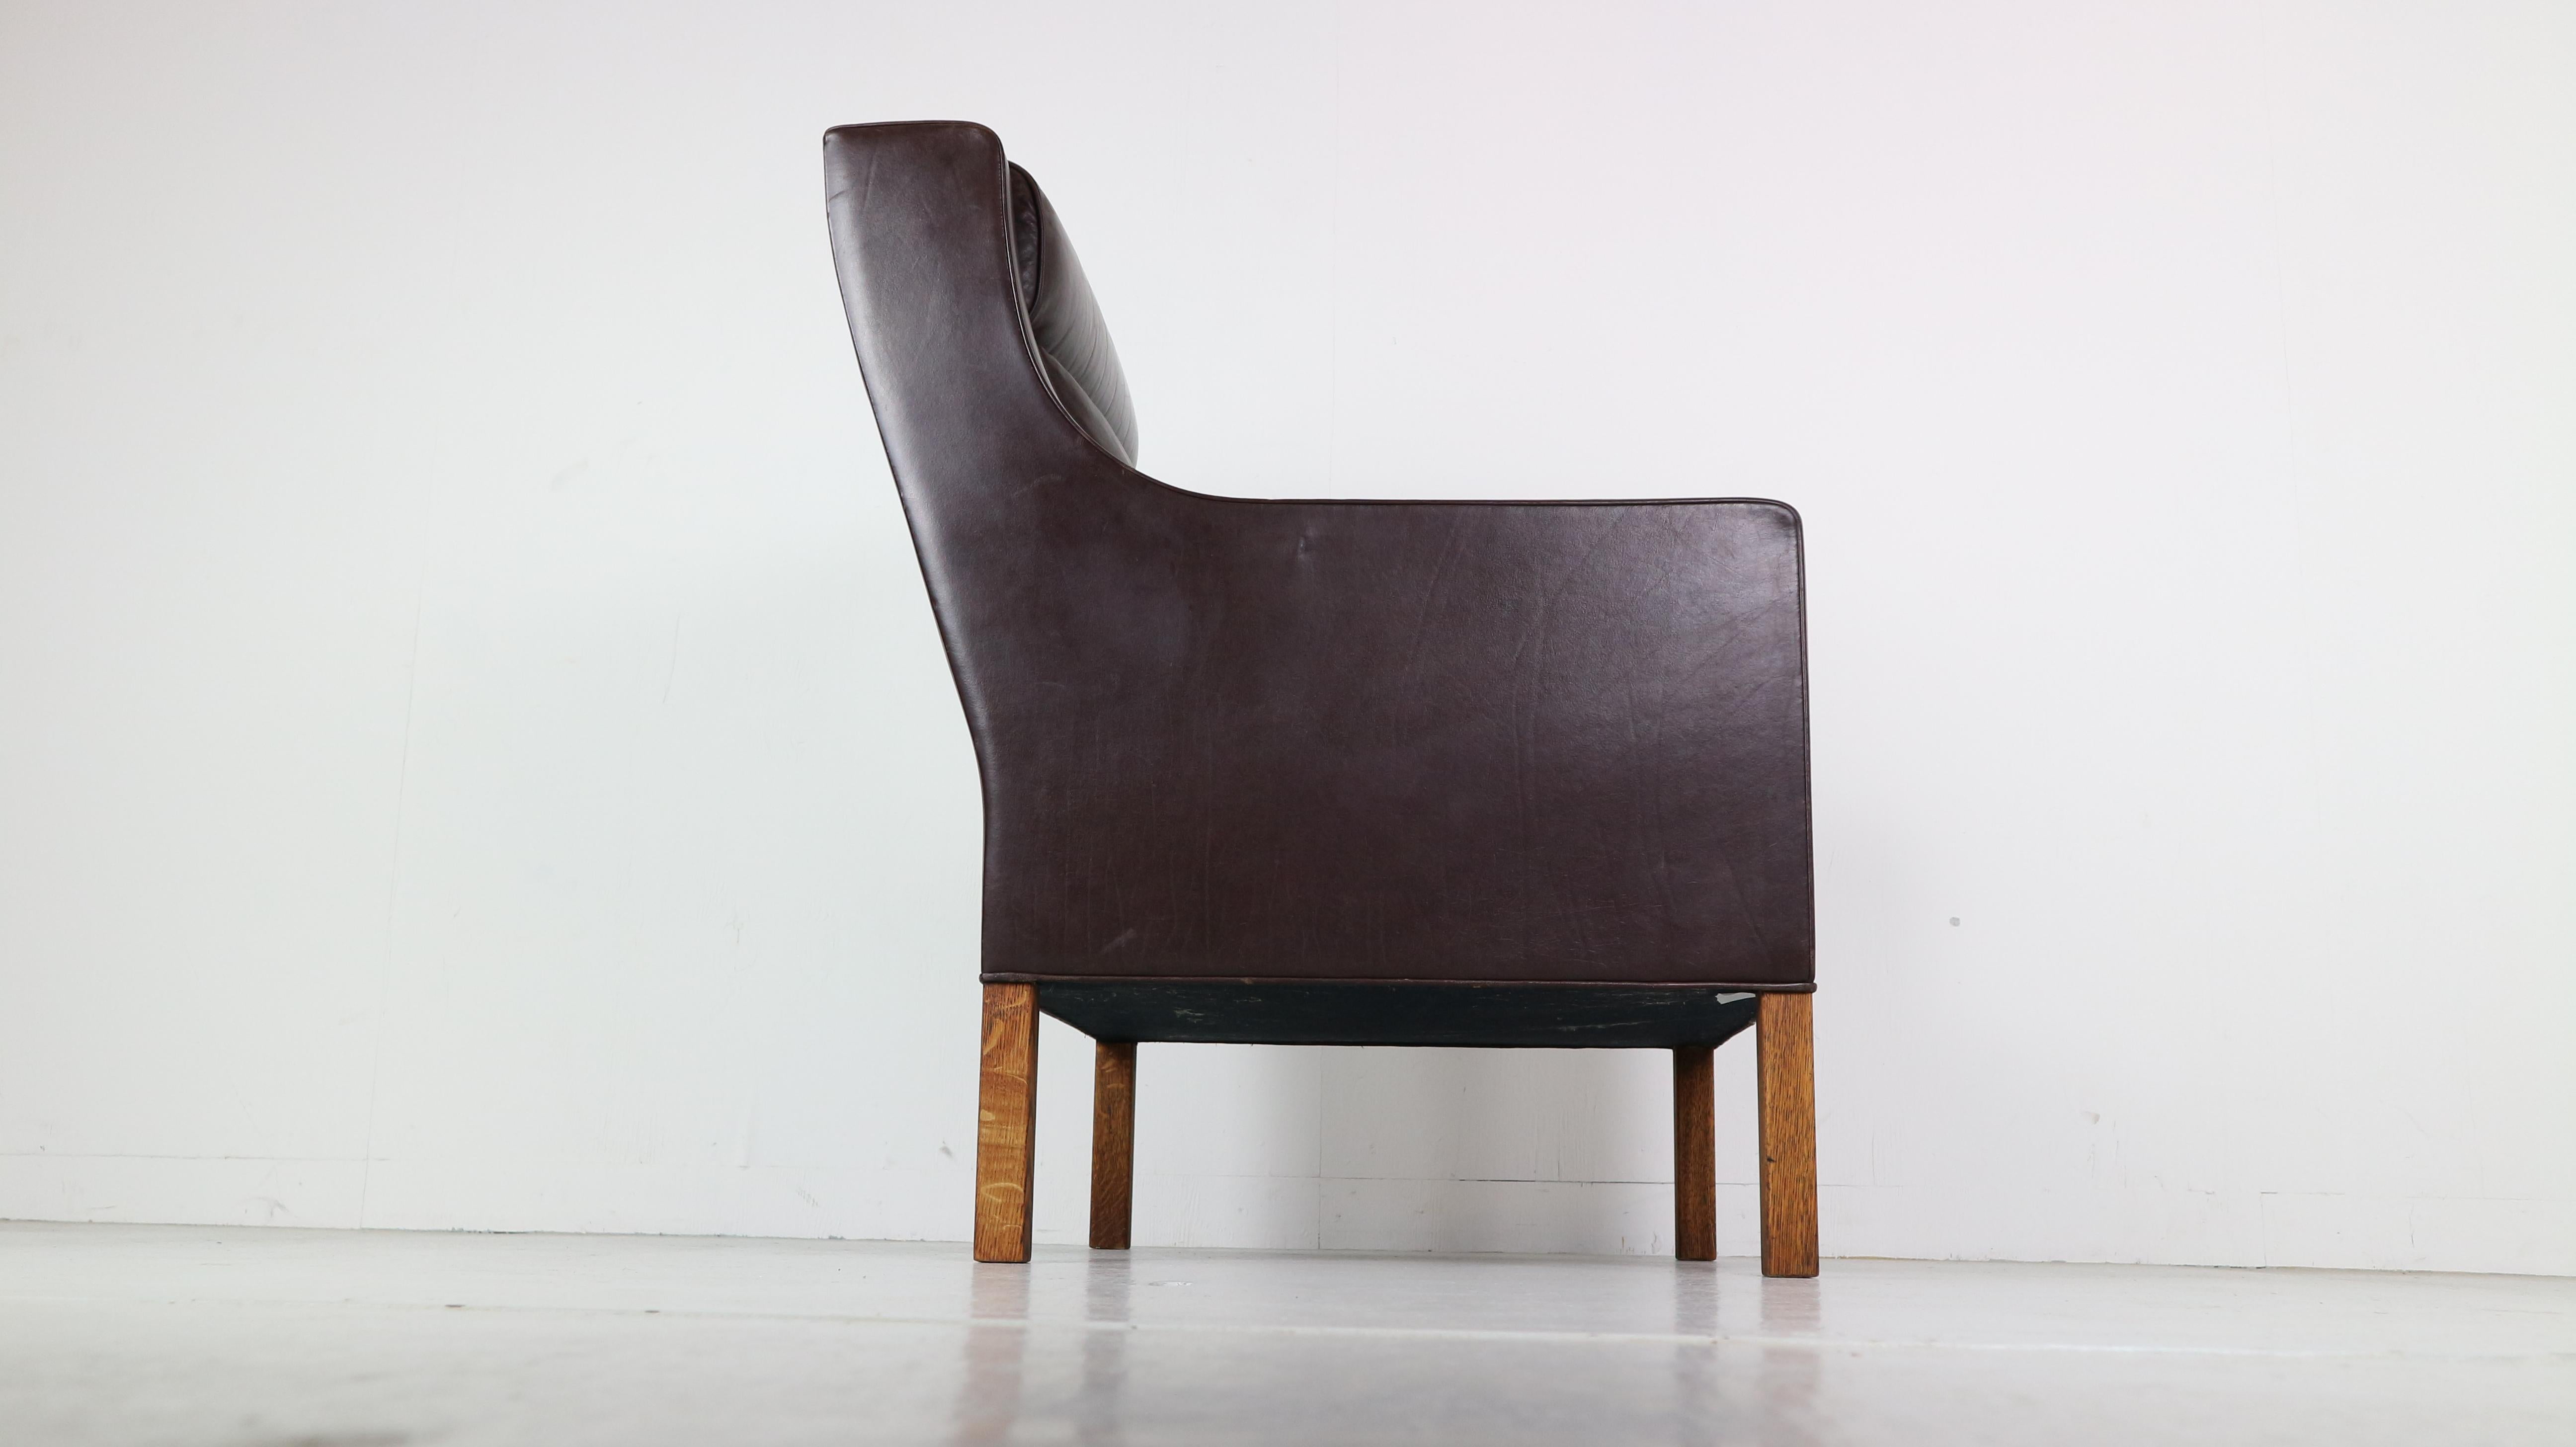 Danish Wingback Chair 2431 by Børge Mogensen for Fredericia Furniture